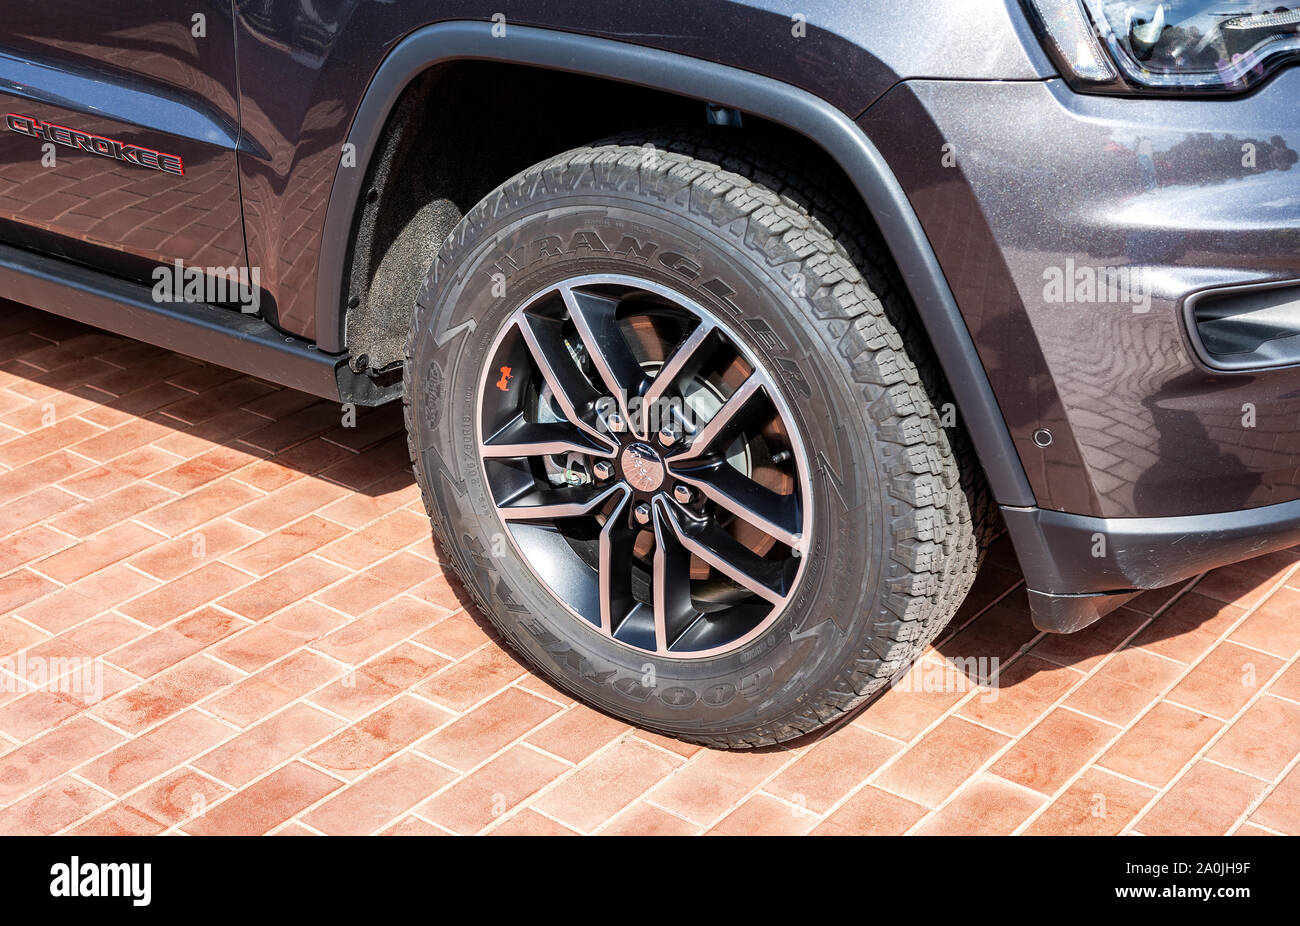 Moscow, Russia - September 8, 2019: Close up view of Jeep Grand Cherokee  wheel with Goodyear Wrangler tubeless tire Stock Photo - Alamy